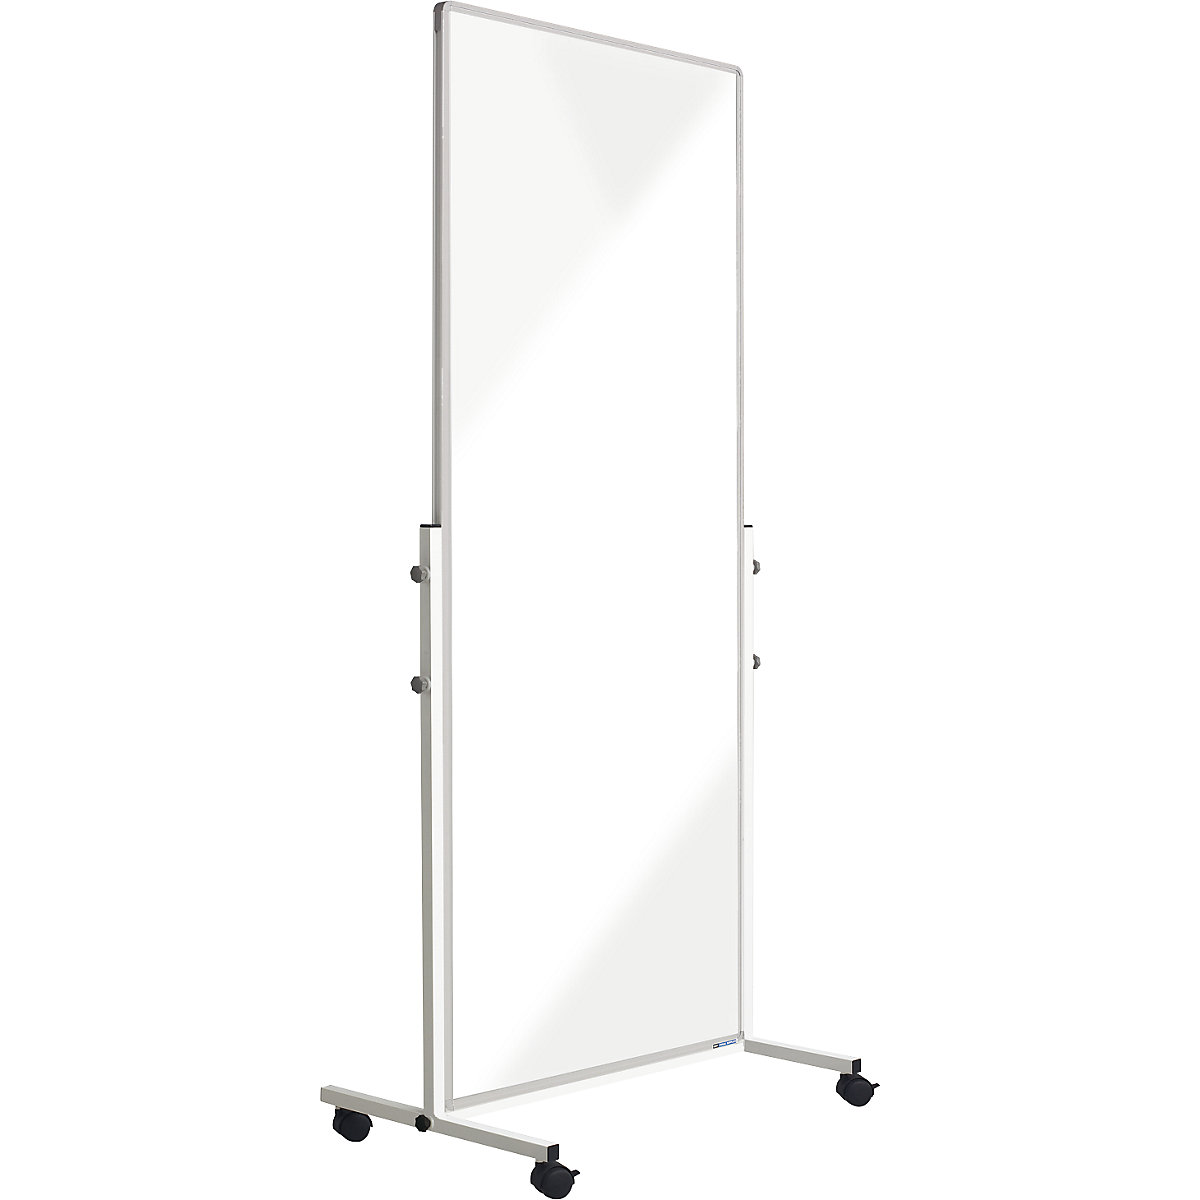 Mobile partition made of acrylic glass